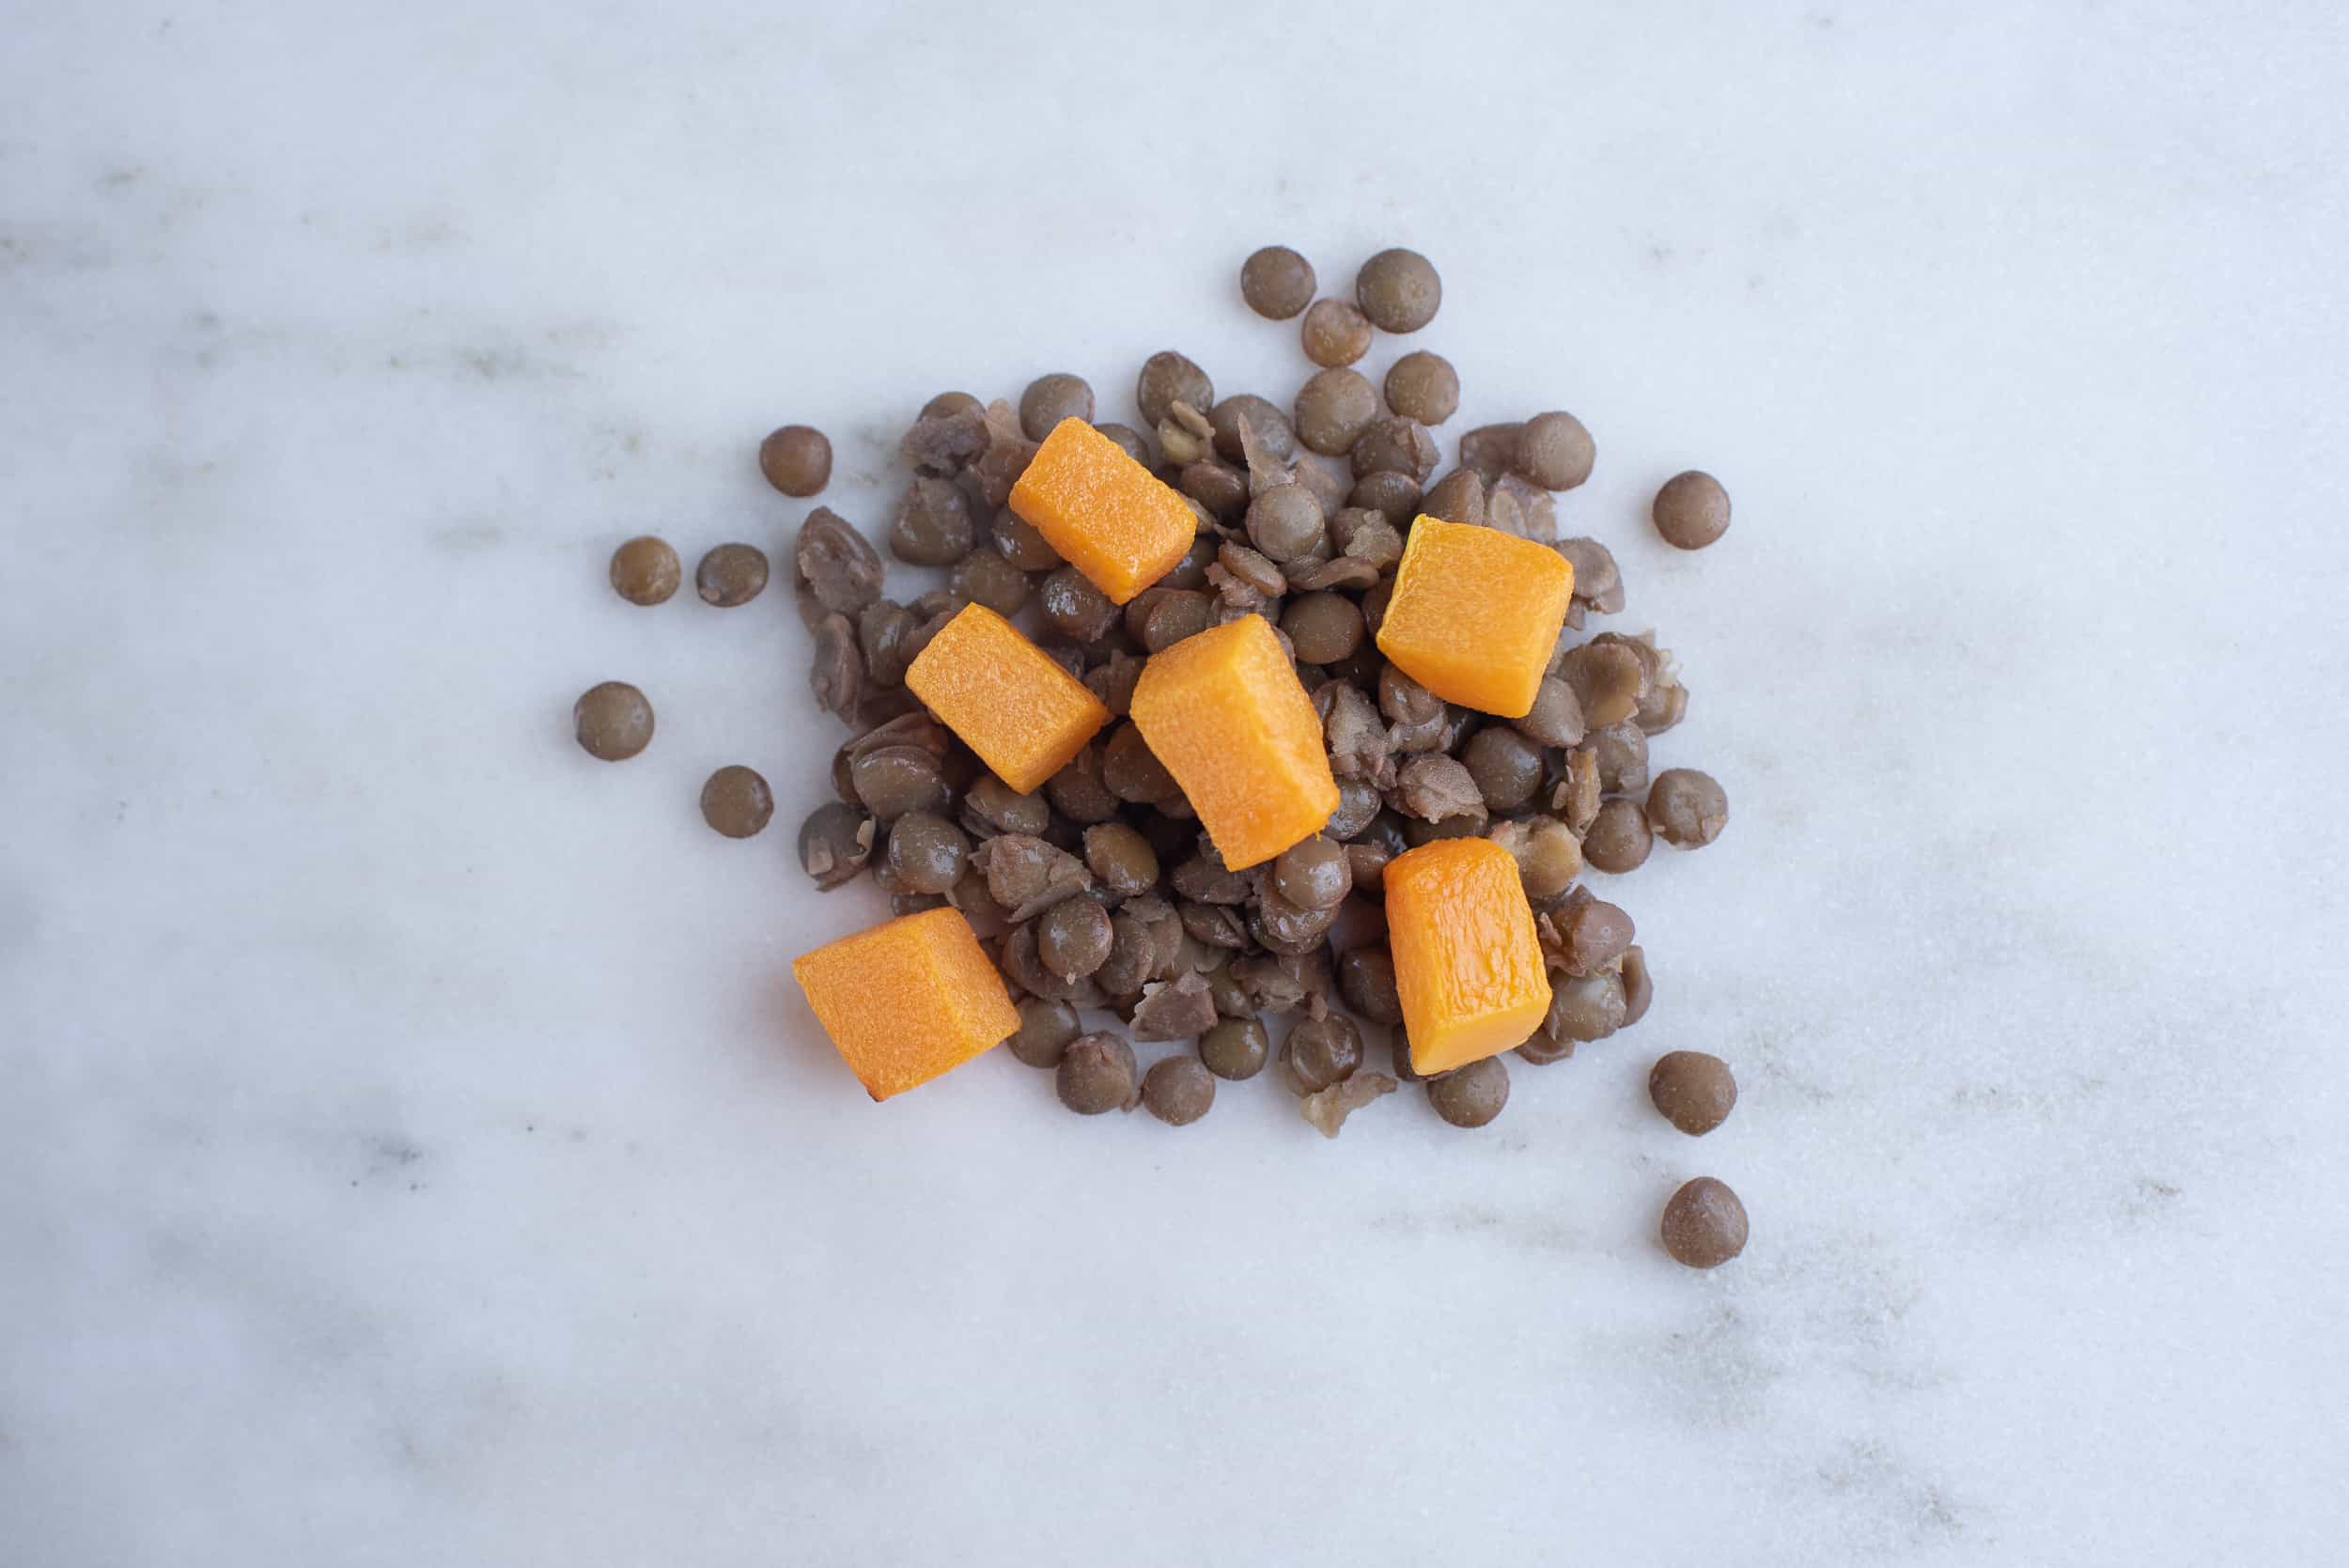 cubes of roasted butternut squash atop a pile of lentils